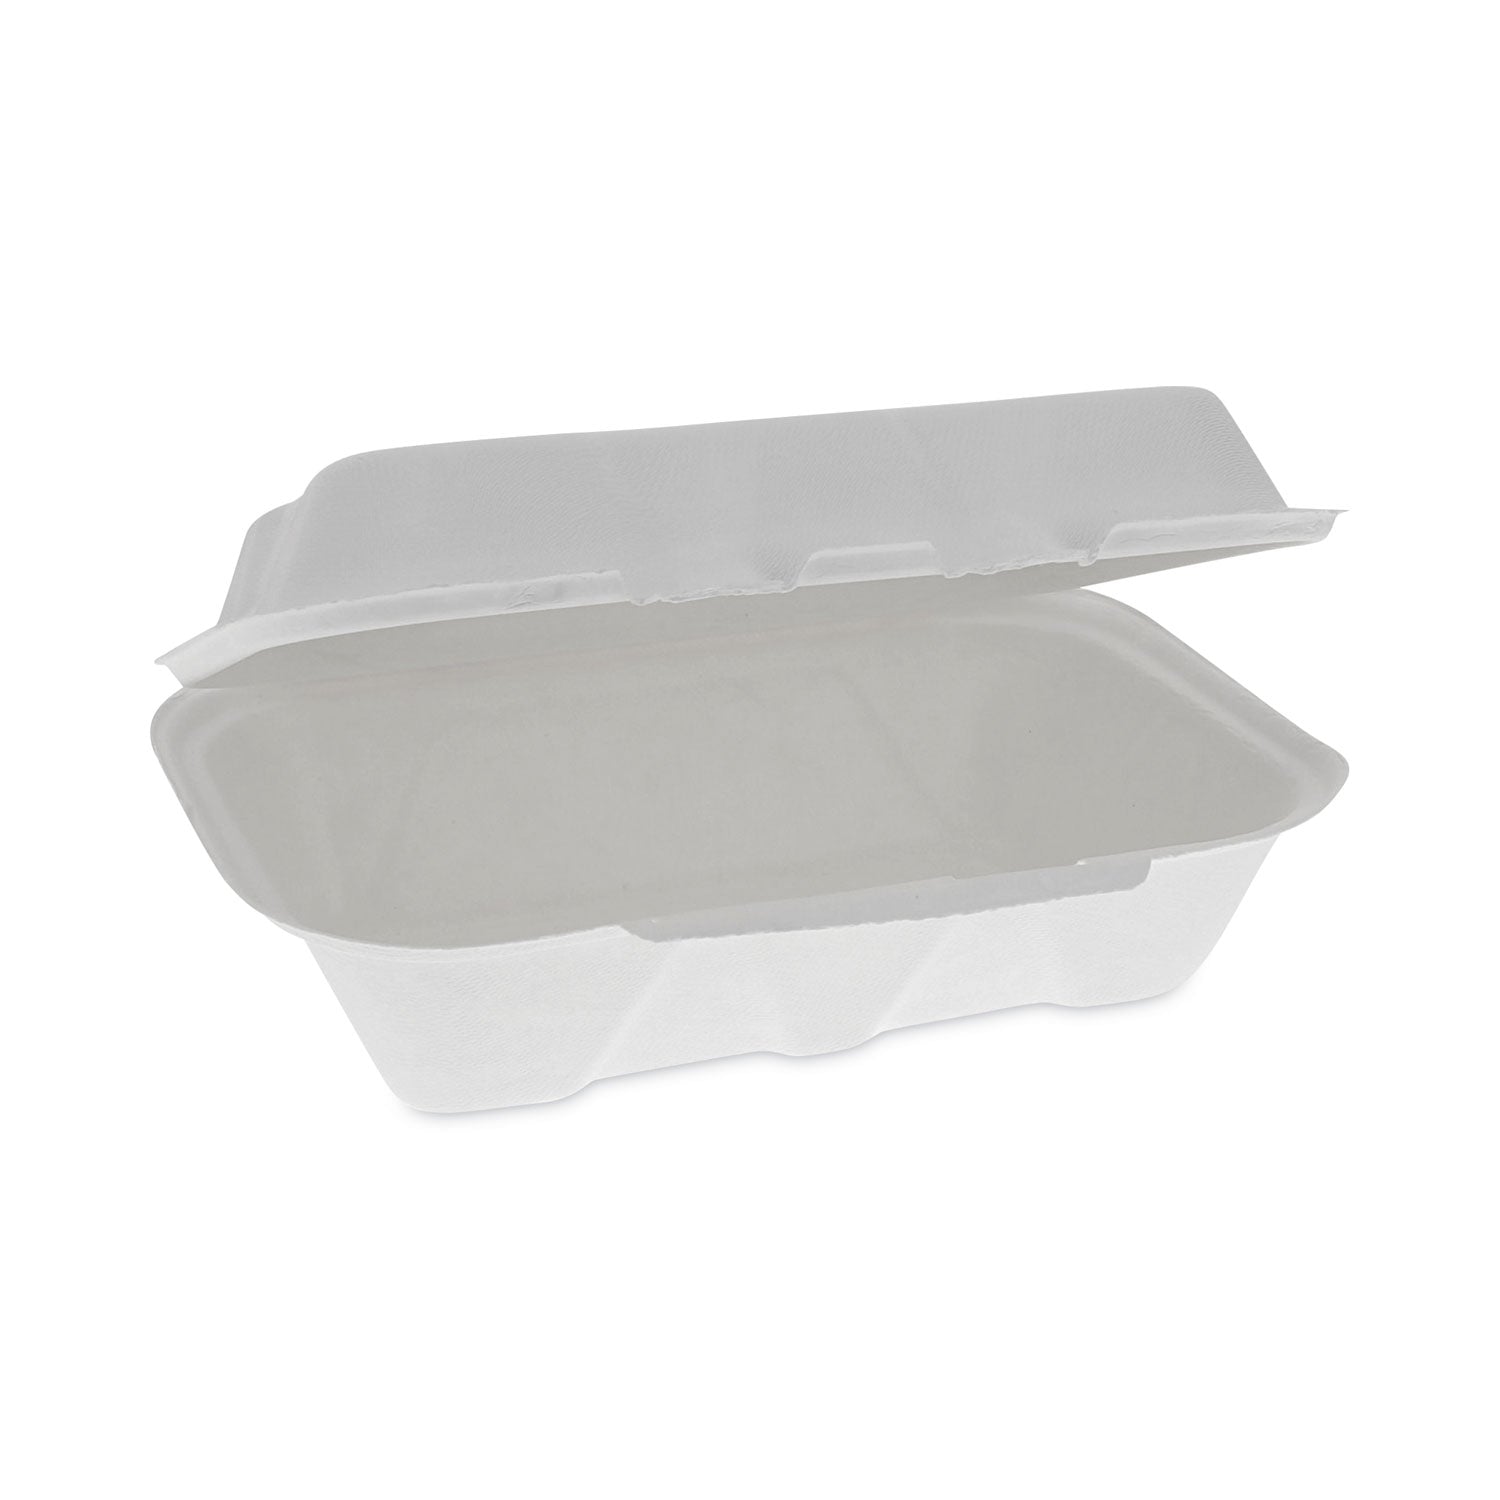 earthchoice-bagasse-hinged-lid-container-dual-tab-lock-91-x-61-x-33-natural-sugarcane-150-carton_pctymch00890001 - 1